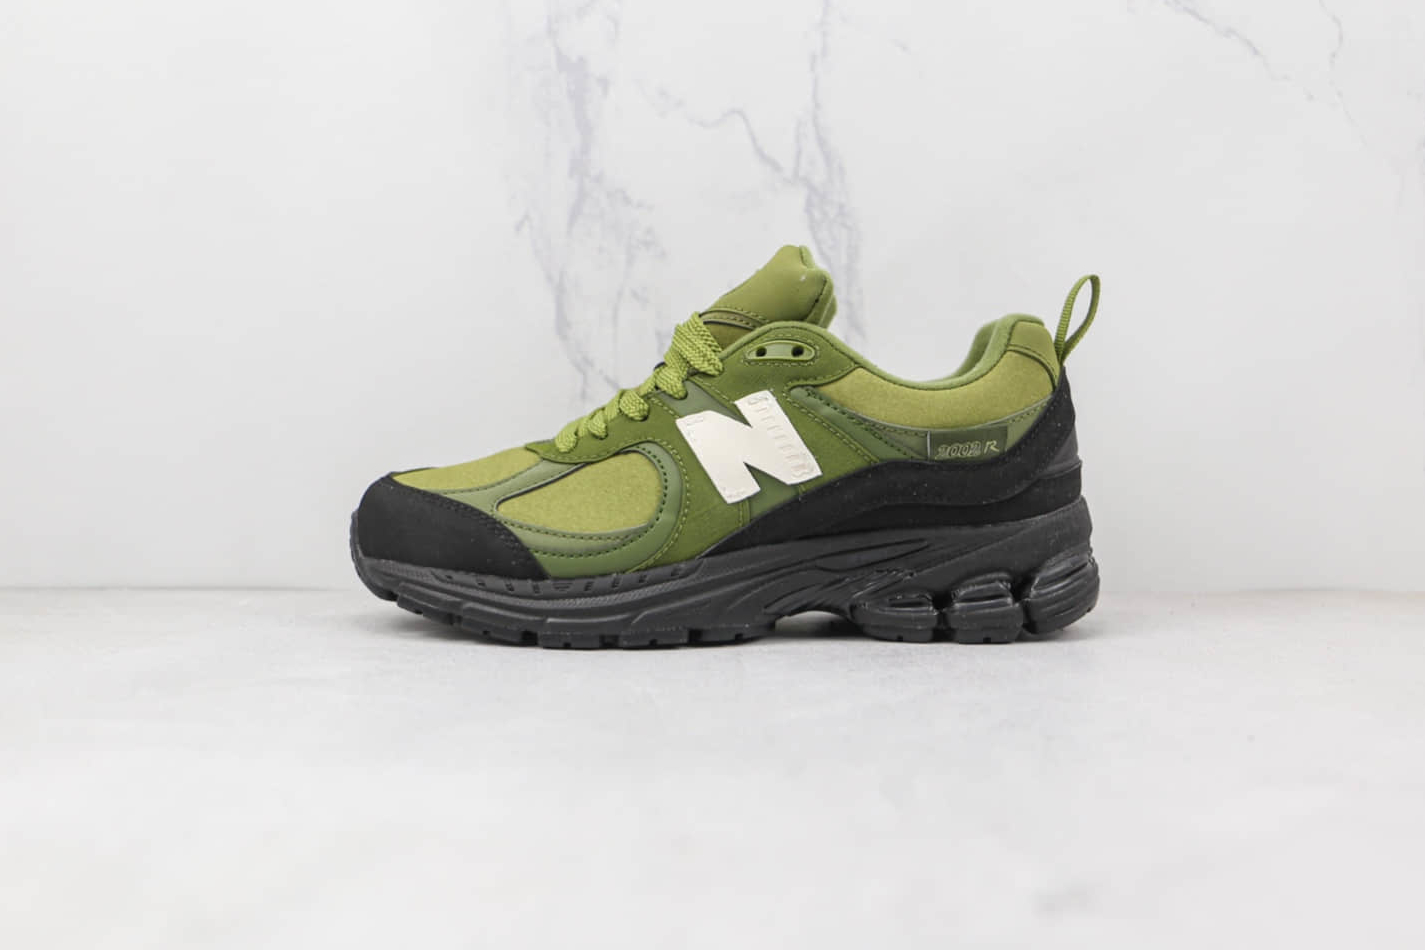 New Balance Basement x 2002R 'Moss Green' - Stylish and Exclusive Limited Edition